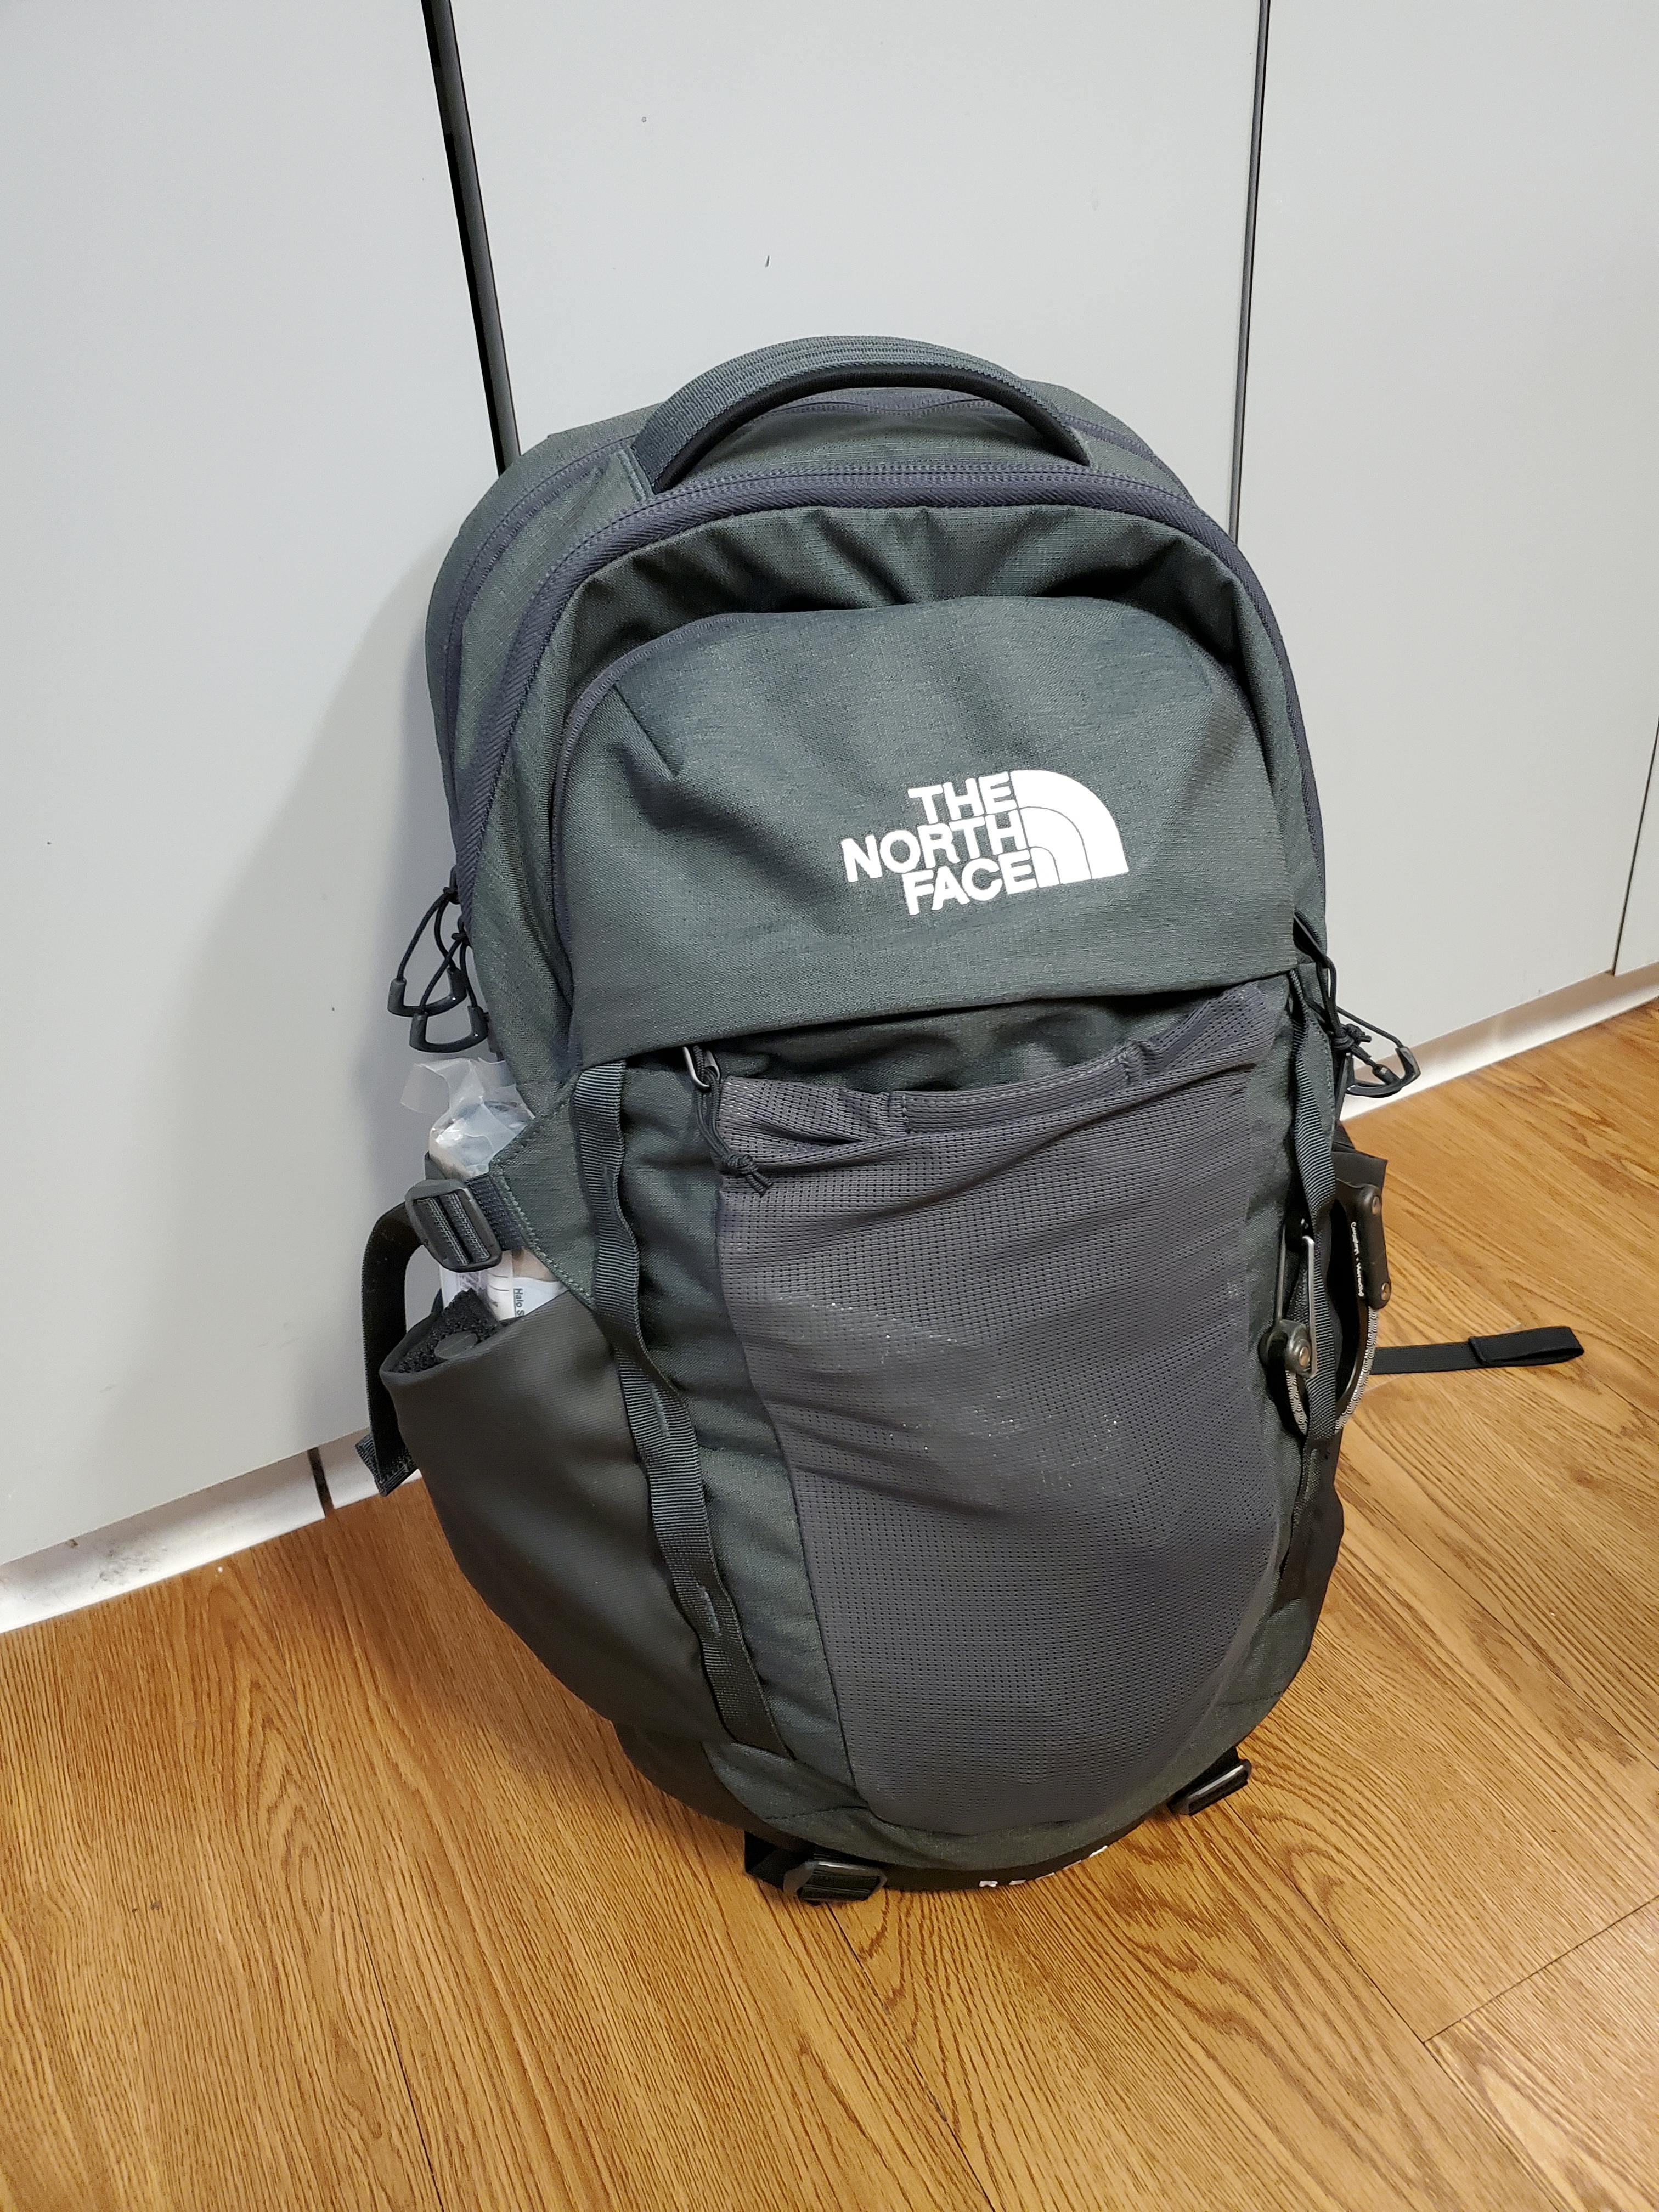 The TNF Recon Backpack.